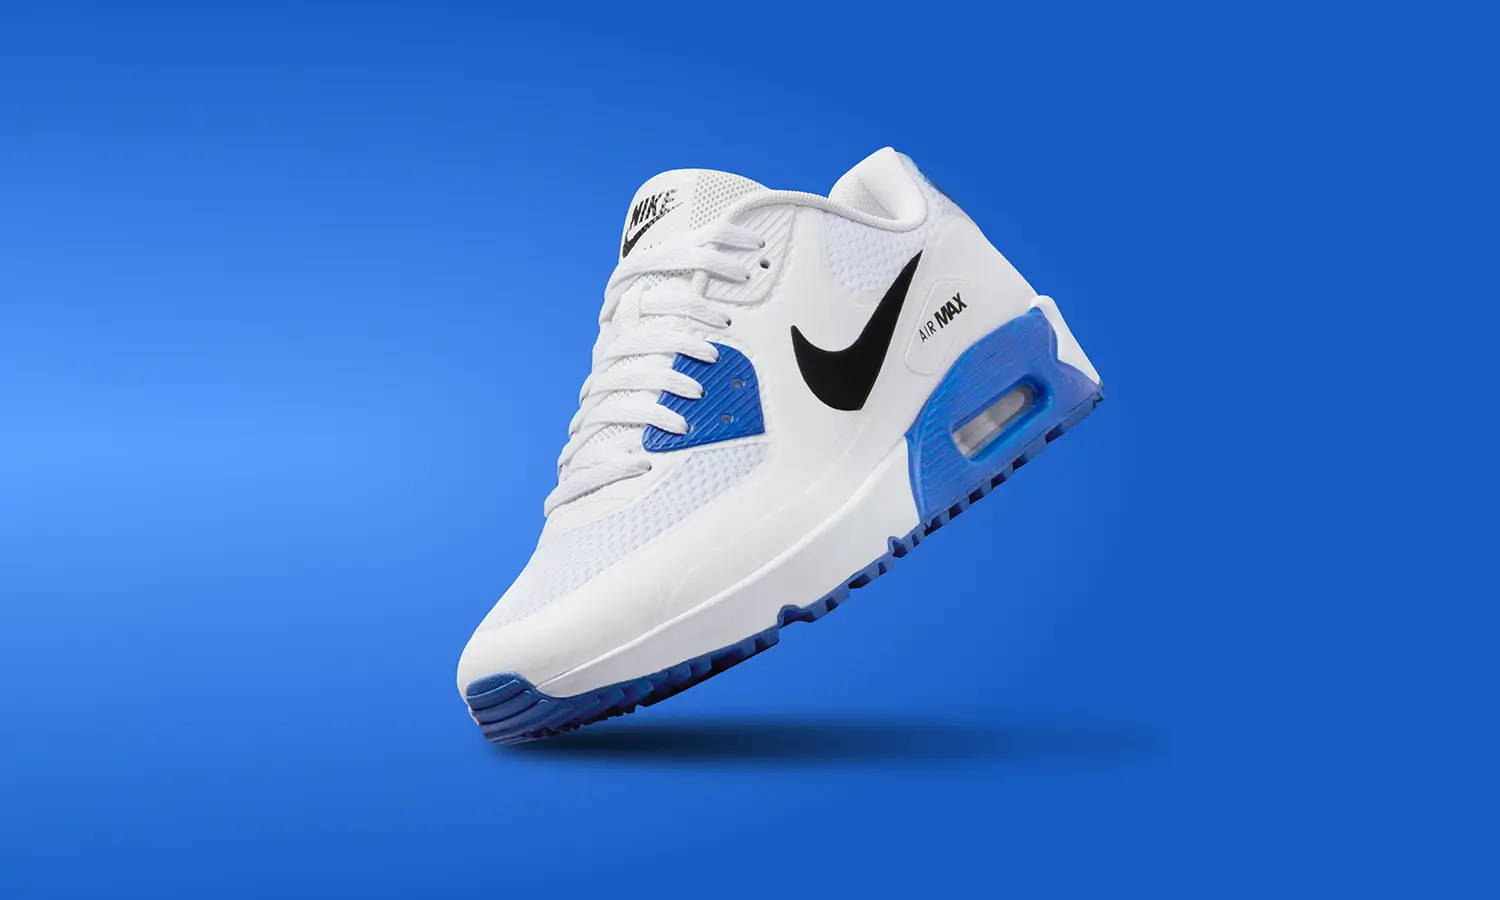 Nike Golf Shoes Tablet